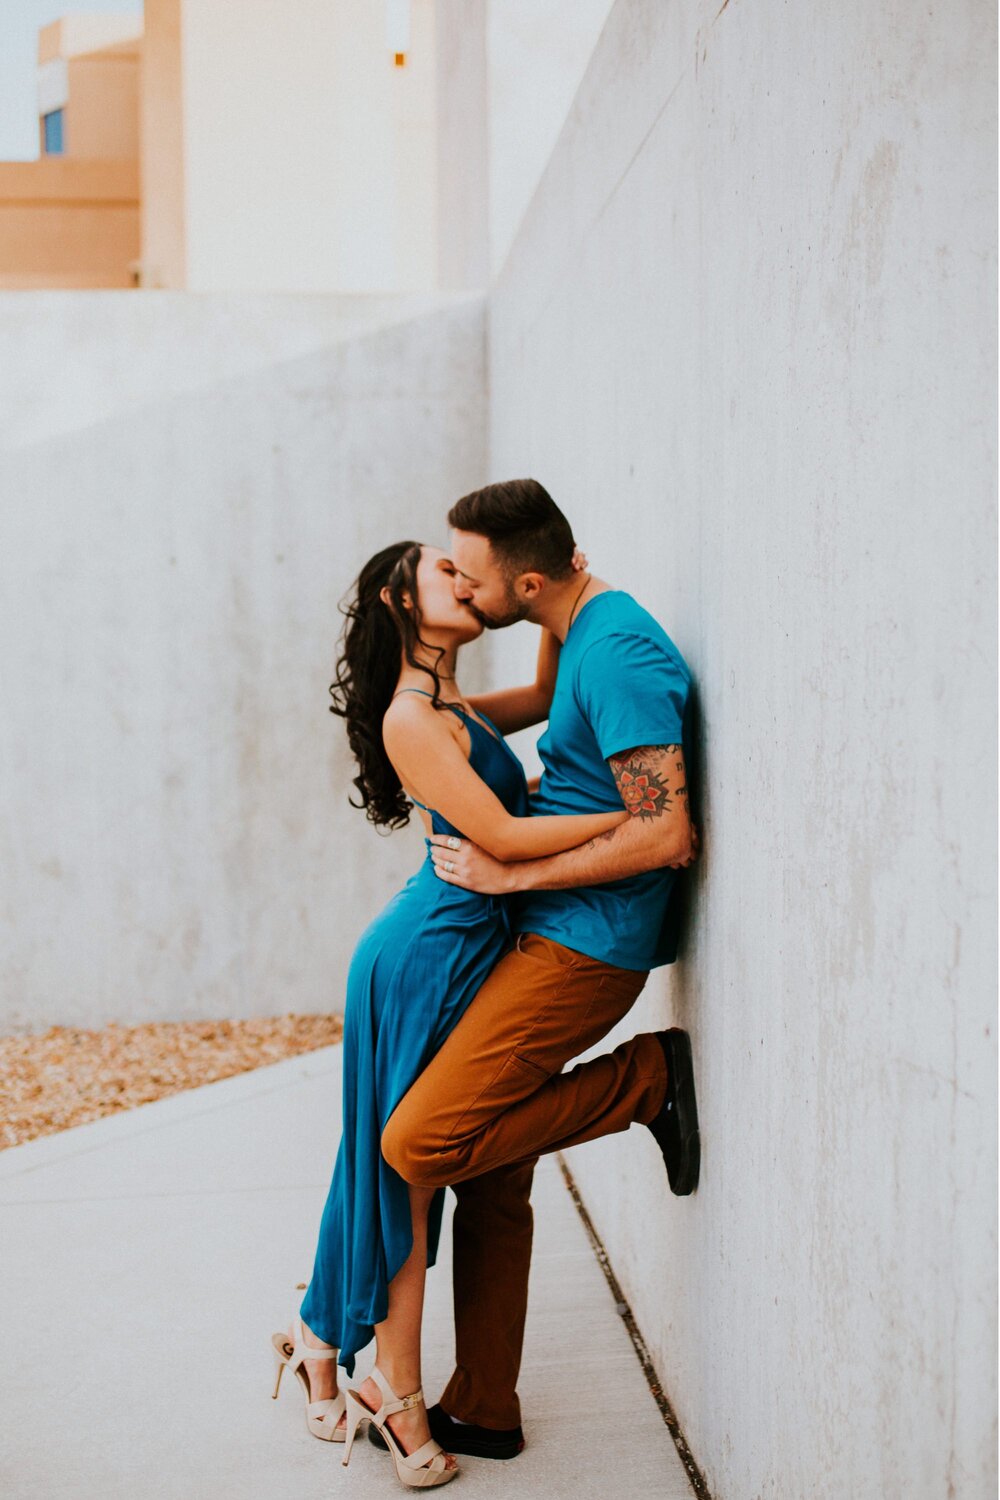  Xamie and Nate’s engagement photos at the University of New Mexico Main Campus in Albuquerque, New Mexico was truly fabulous! Exploring the UNM Campus and taking the cutest New Years Eve engagement photos of Xamie and Nate was the perfect way to end